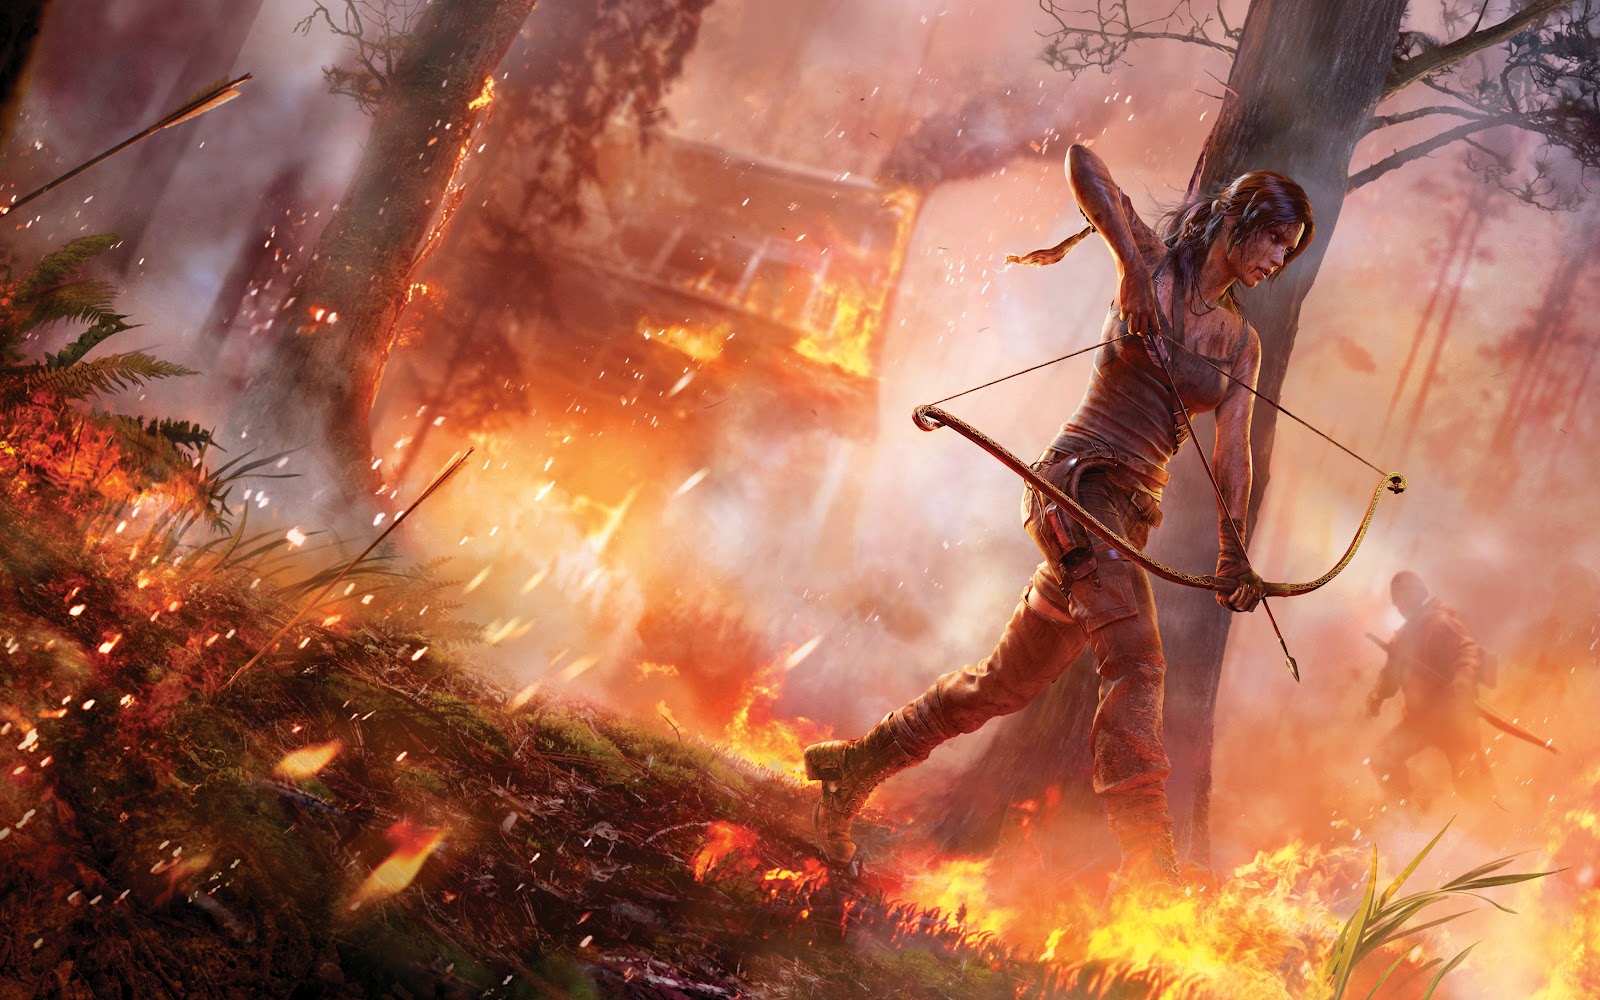 Hd Wallpapers Blog: Tomb Raider Game Wallpapers